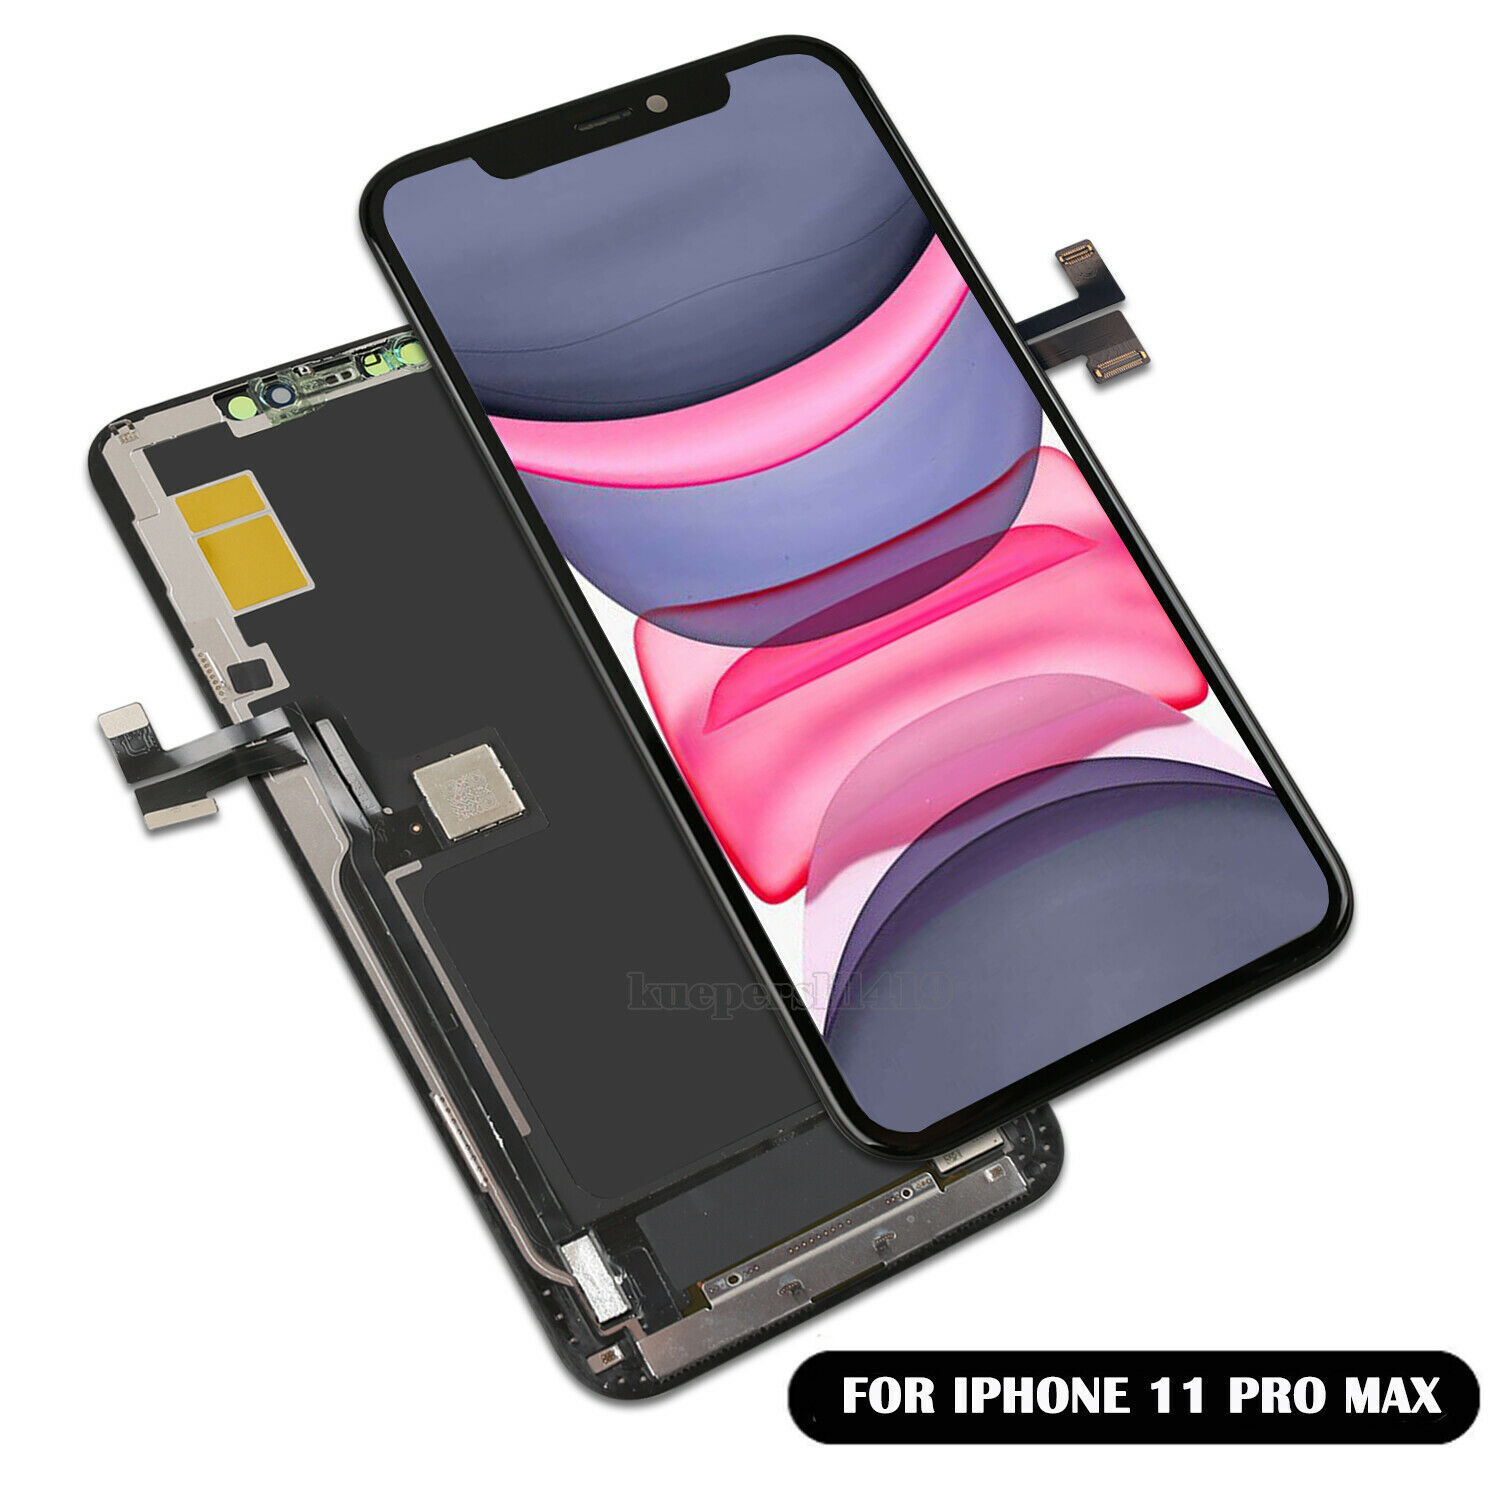 Apple iPhone 11 Pro max Replacement LCD Screen